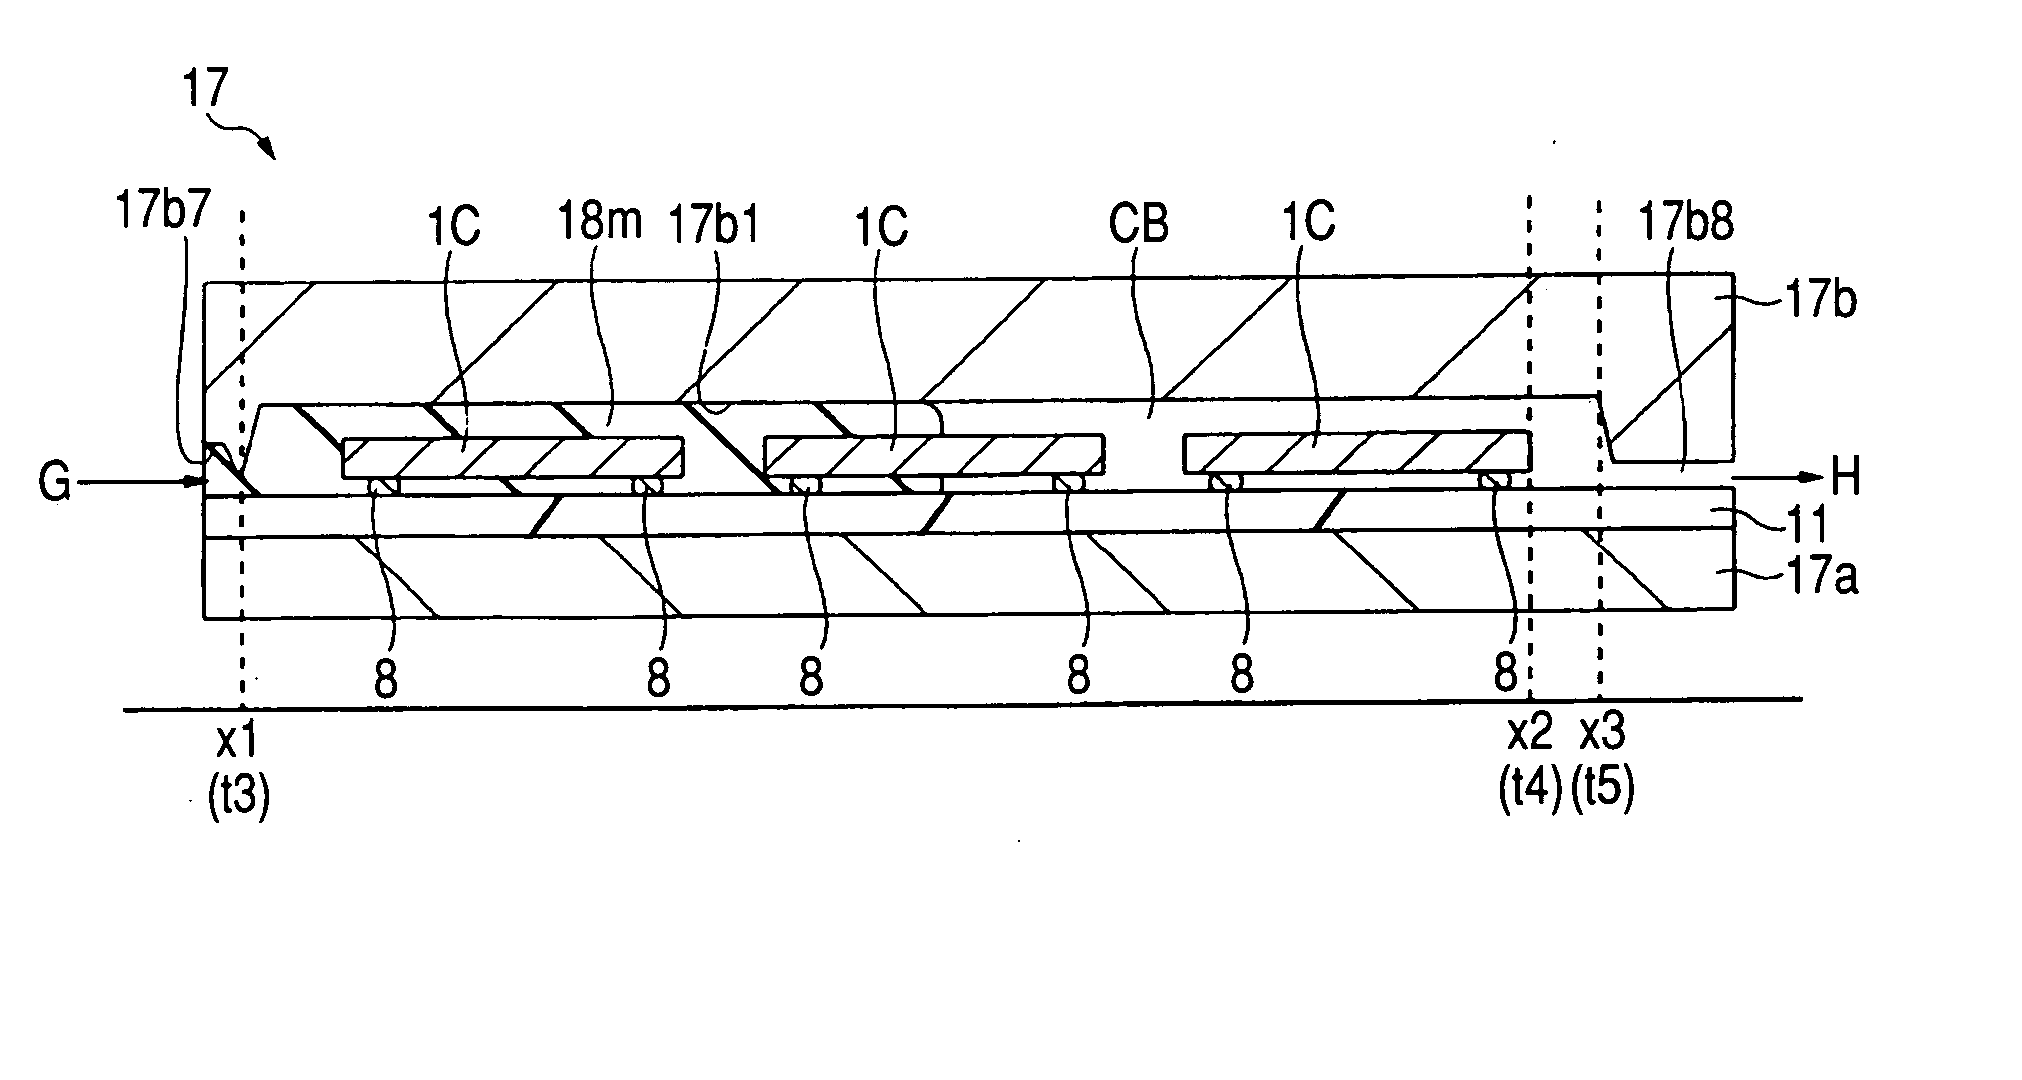 Manufacturing method of a semiconductor device